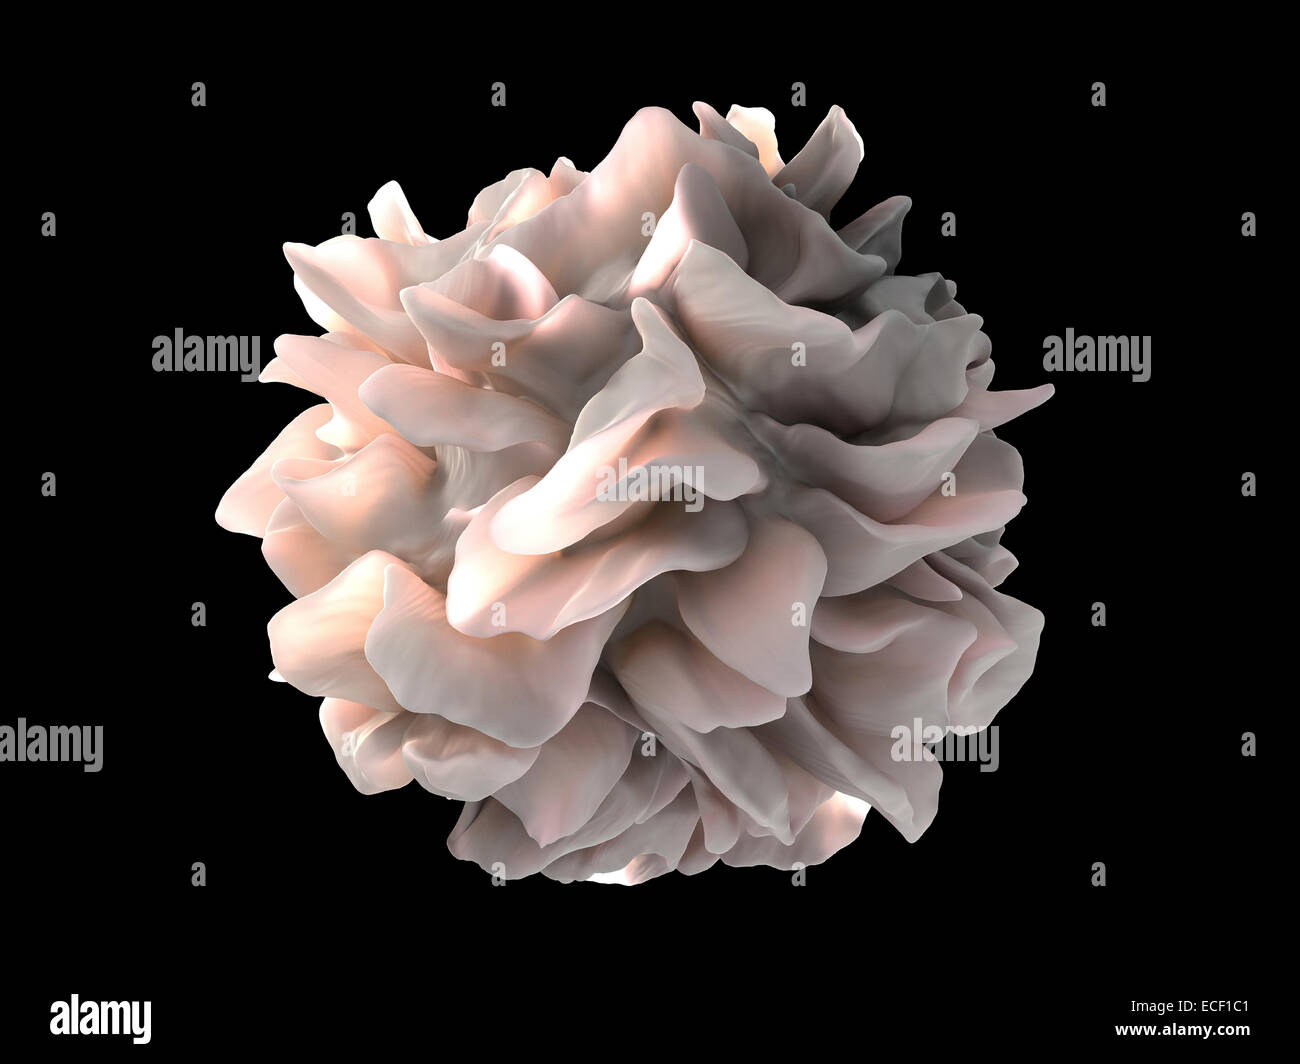 Artistic rendering of the surface of a human dendritic cell illustrating the unexpected discovery of sheet-like processes that f Stock Photo